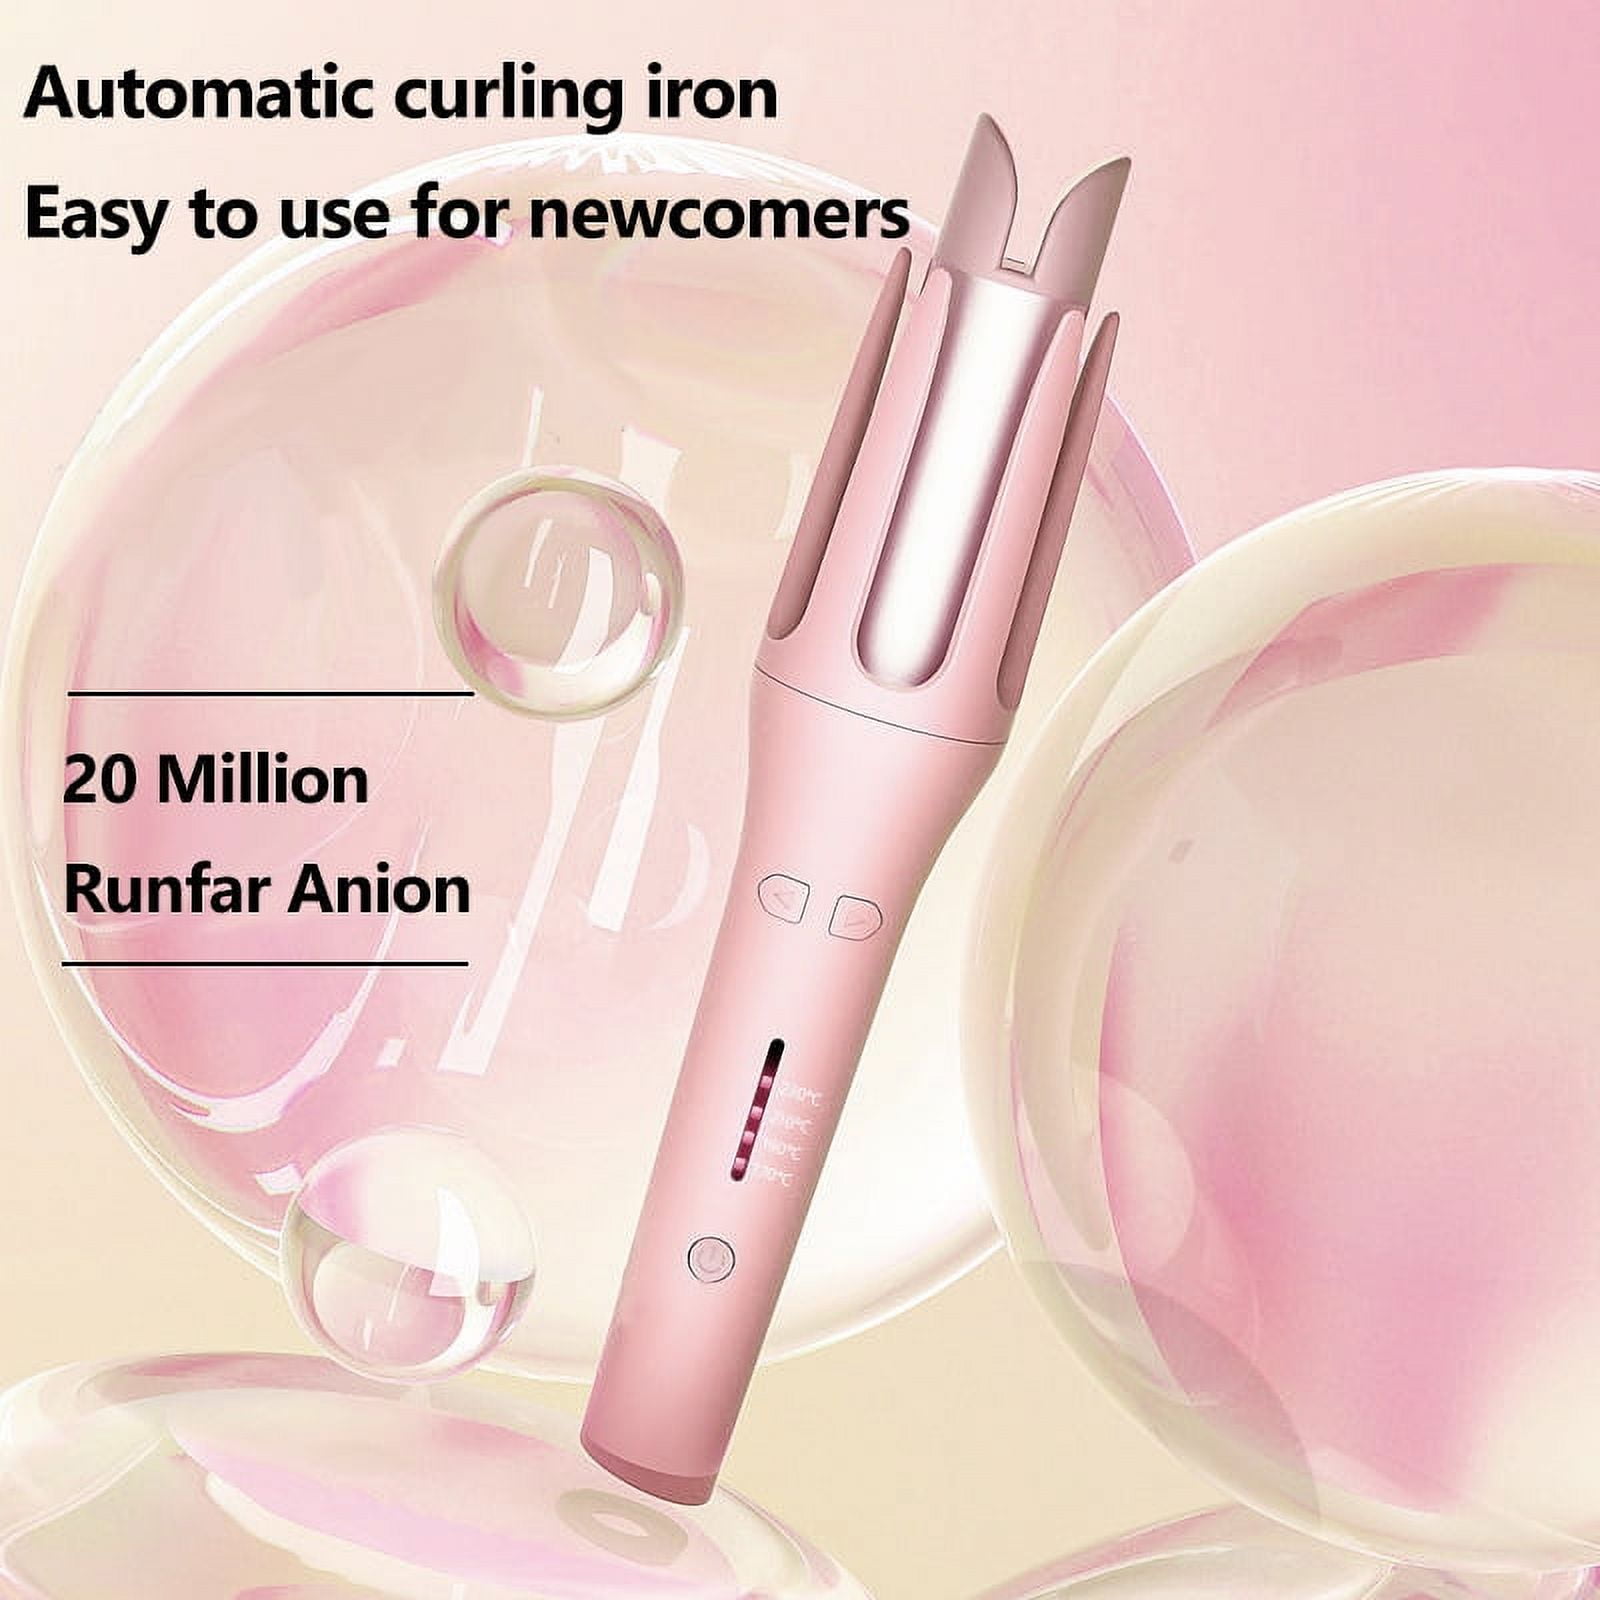 X XBEN Automatic Curling Iron, Professional Anti-Tangle Auto Curling Wand  with 4 Temperatures & Timers & LED Display, Auto Shut-Off for Hair Styling  